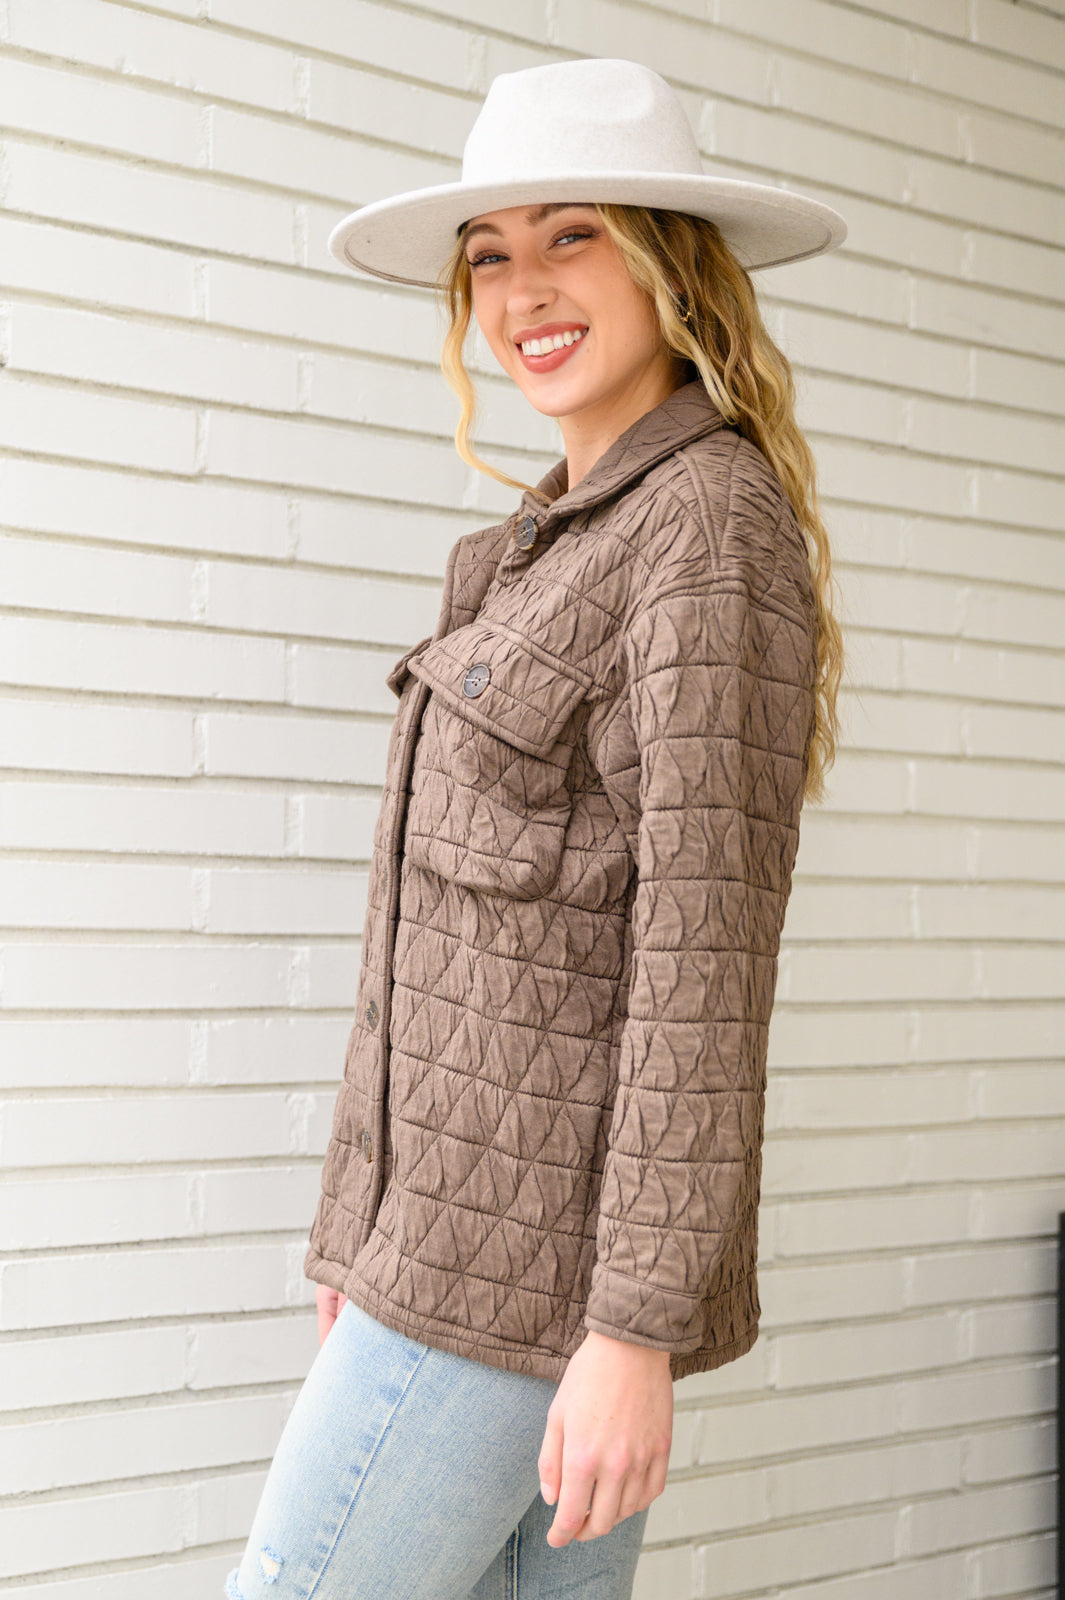 Coming Back Home Jacket in Mocha - 12/20/2022